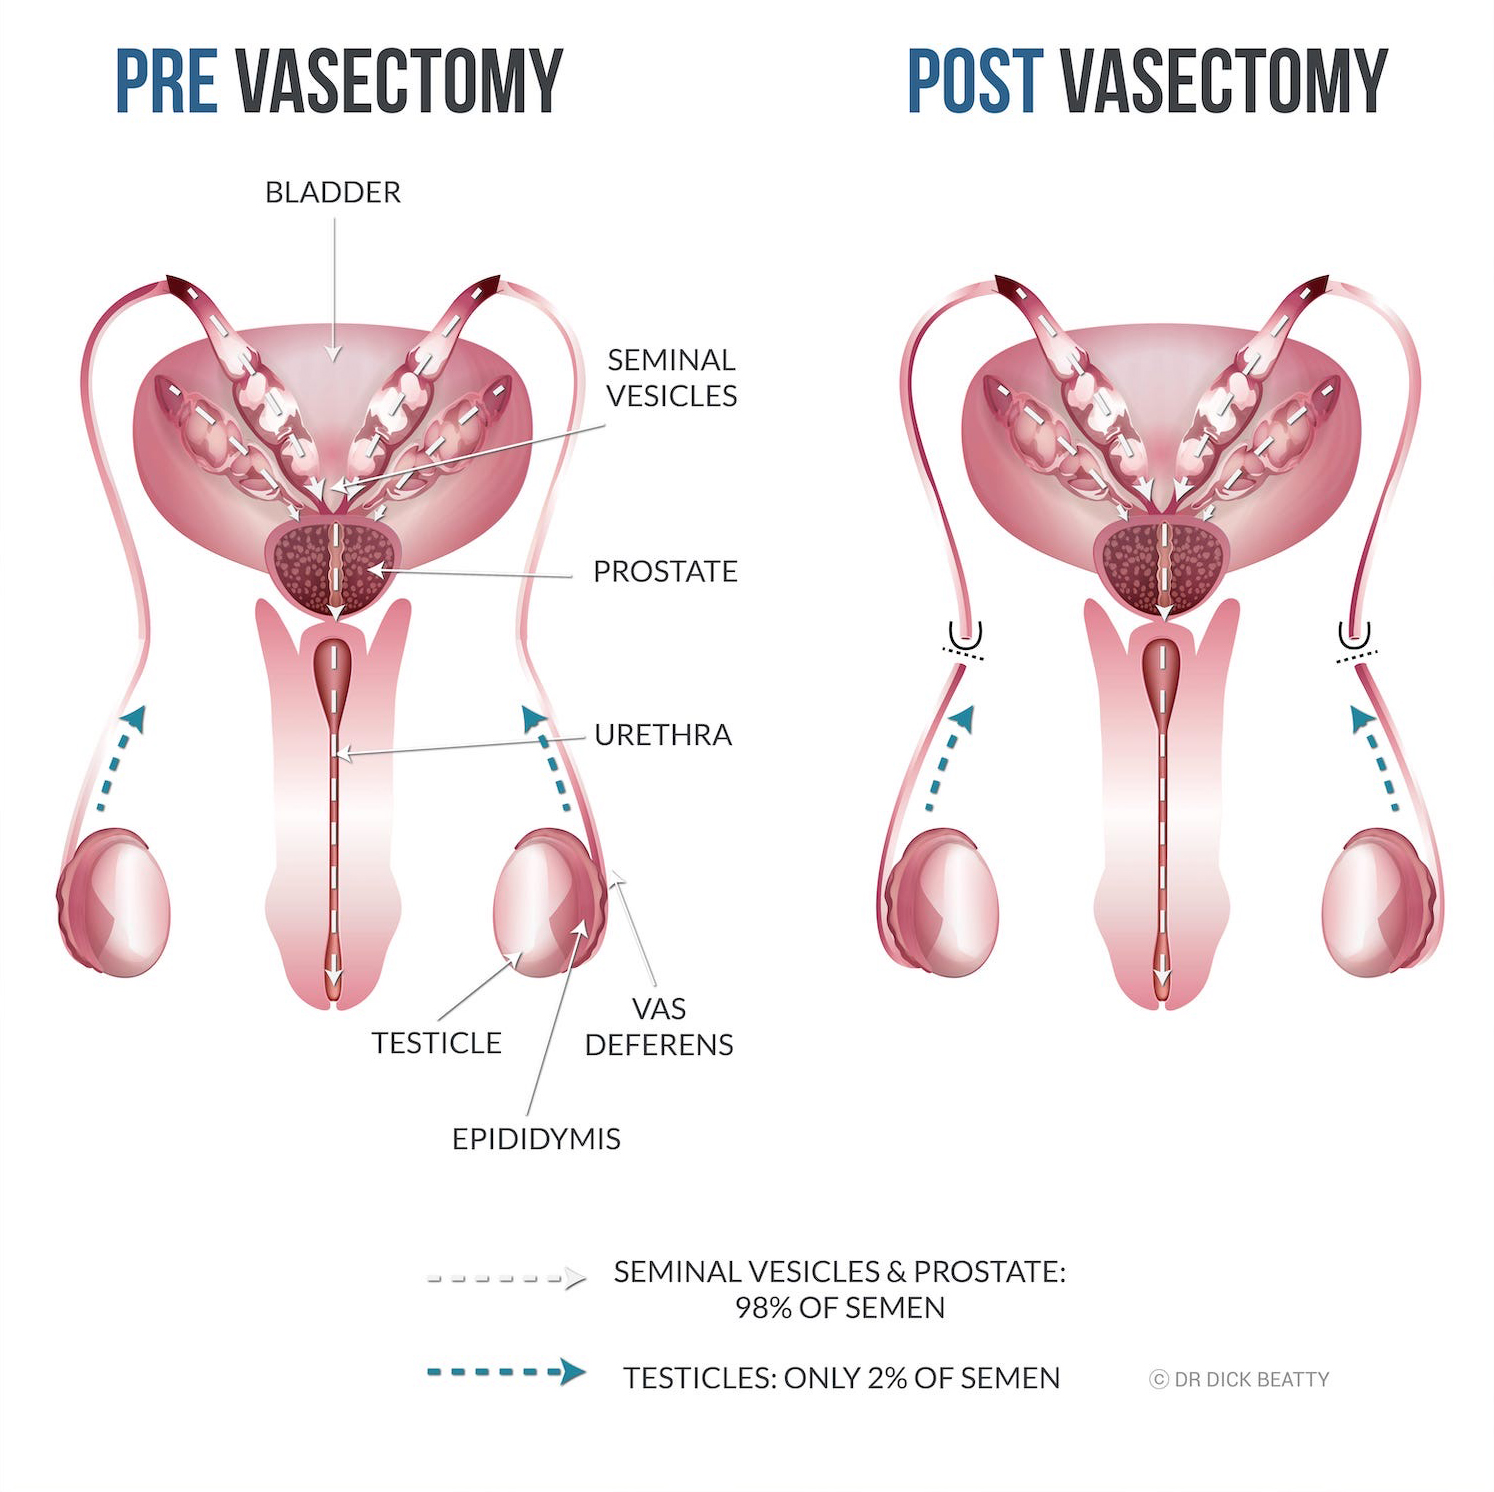 Illustration of male genital anatomy before and after a vasectomy